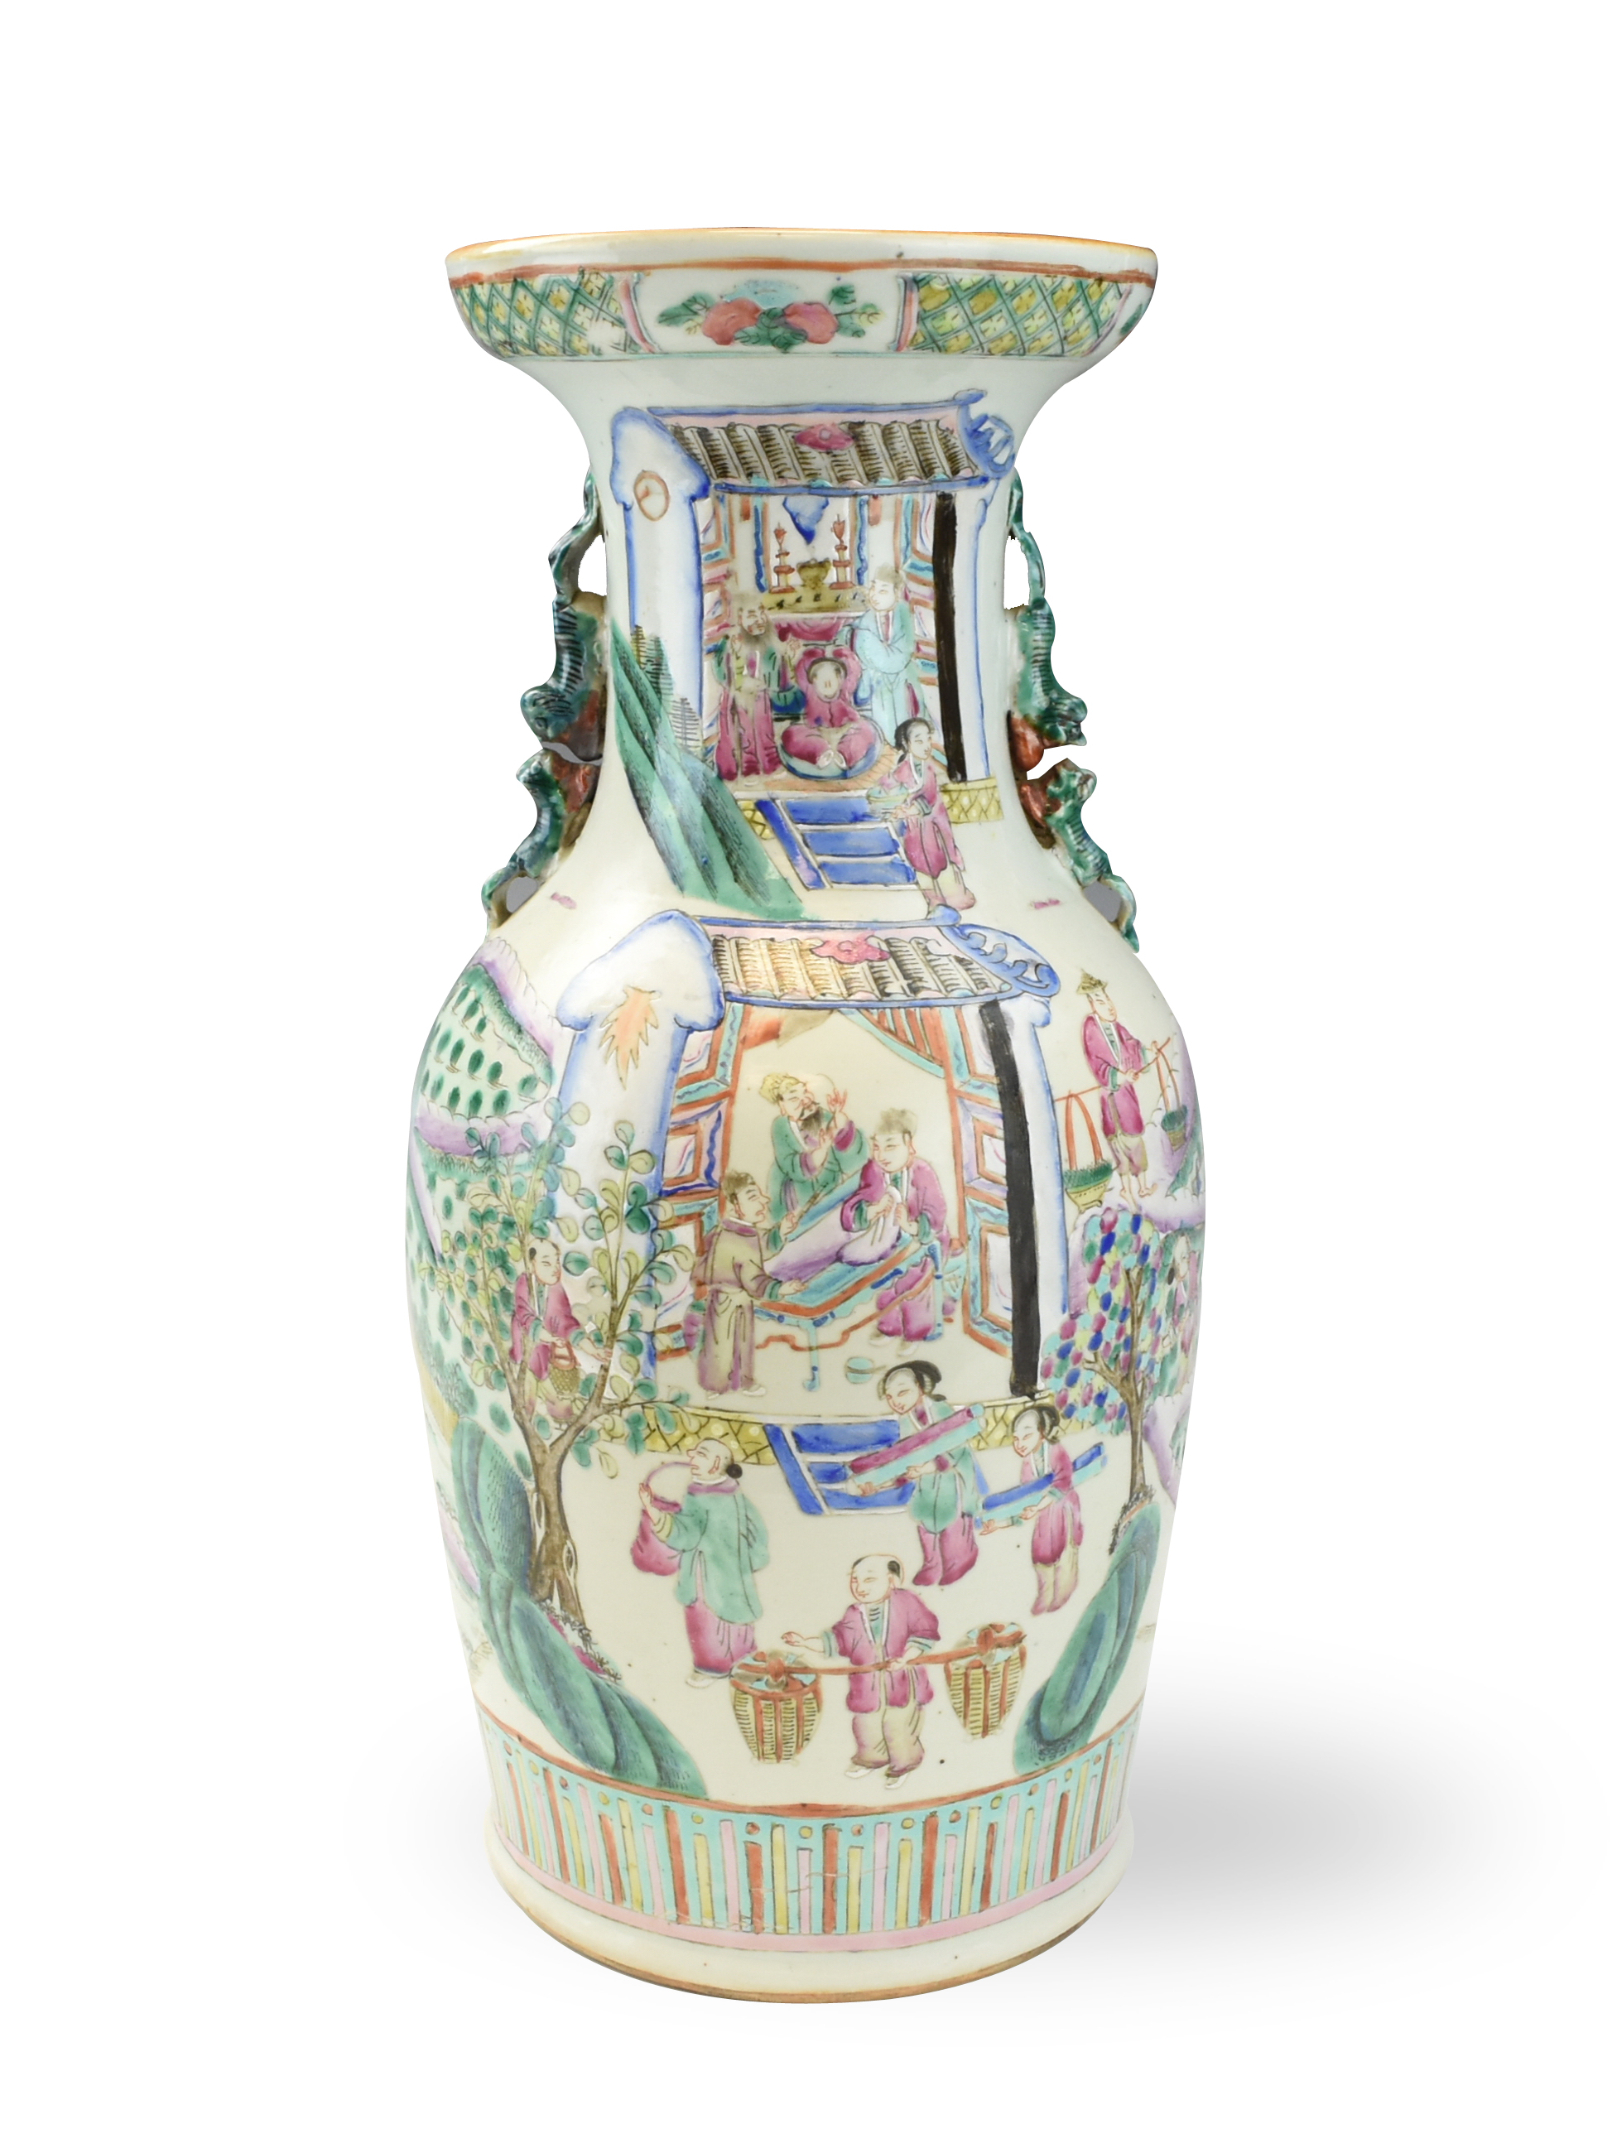 LARGE CHINESE FAMILLE ROSE VASE,19TH